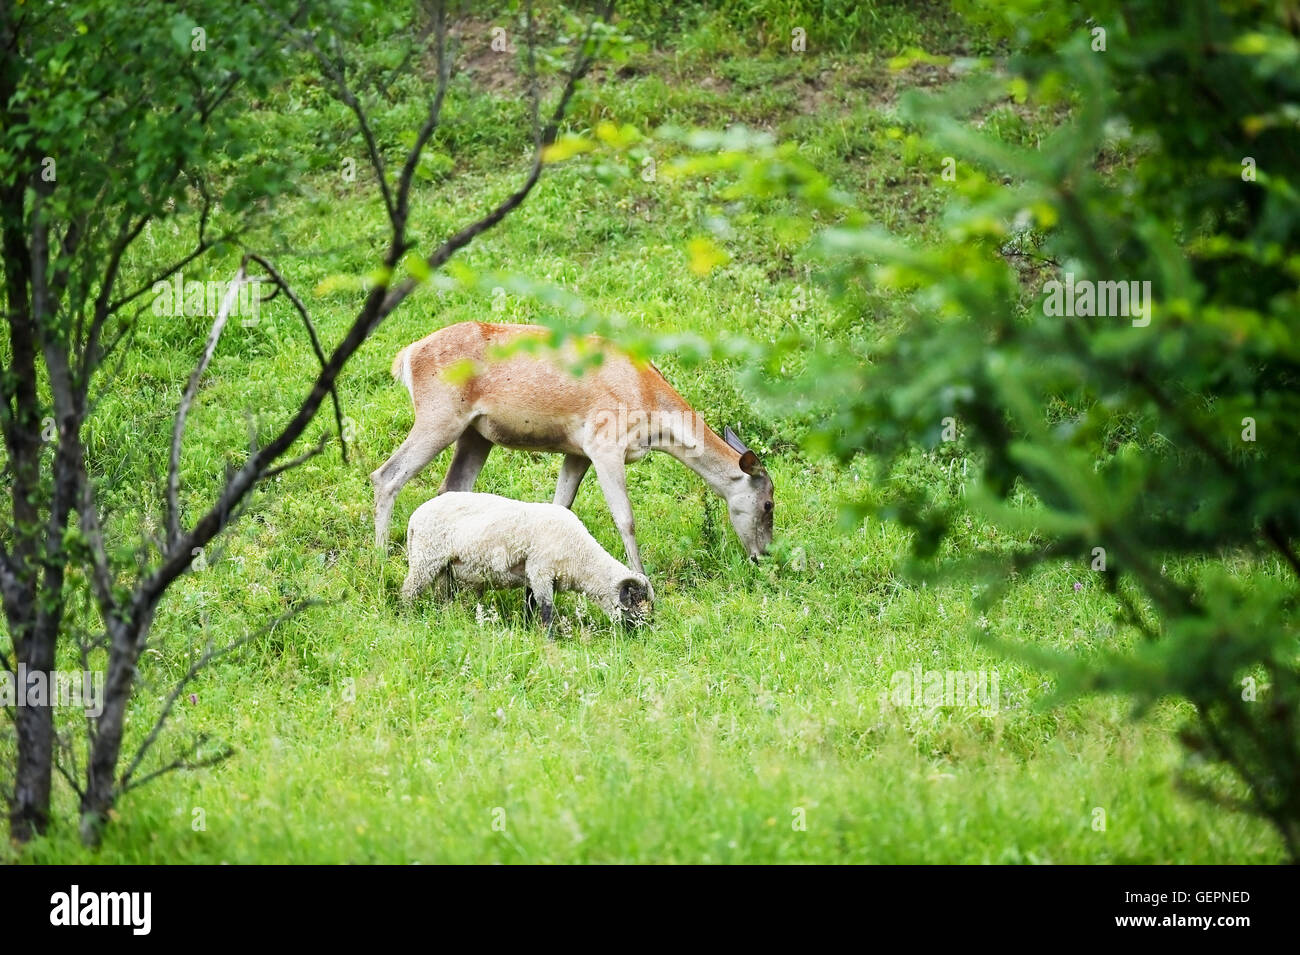 A deer graze next to sheep on a meadow Stock Photo